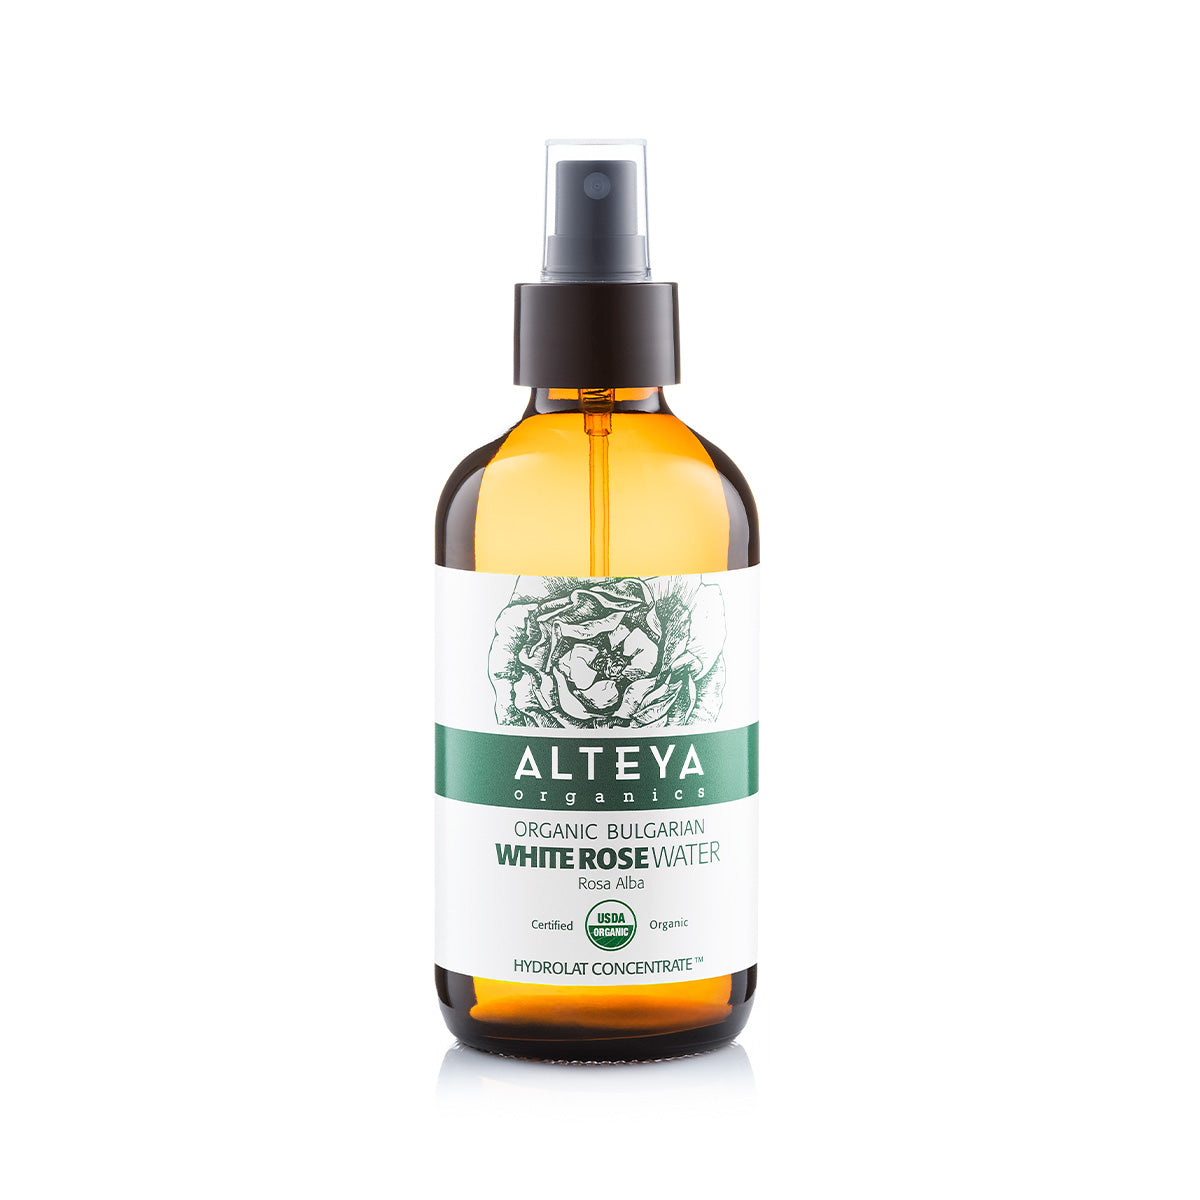 A bottle of Alteya Organics Bulgarian Organic White Rose Water (Rosa Alba) – Glass Spray, made with Rosa Alba blossoms, on a white background.